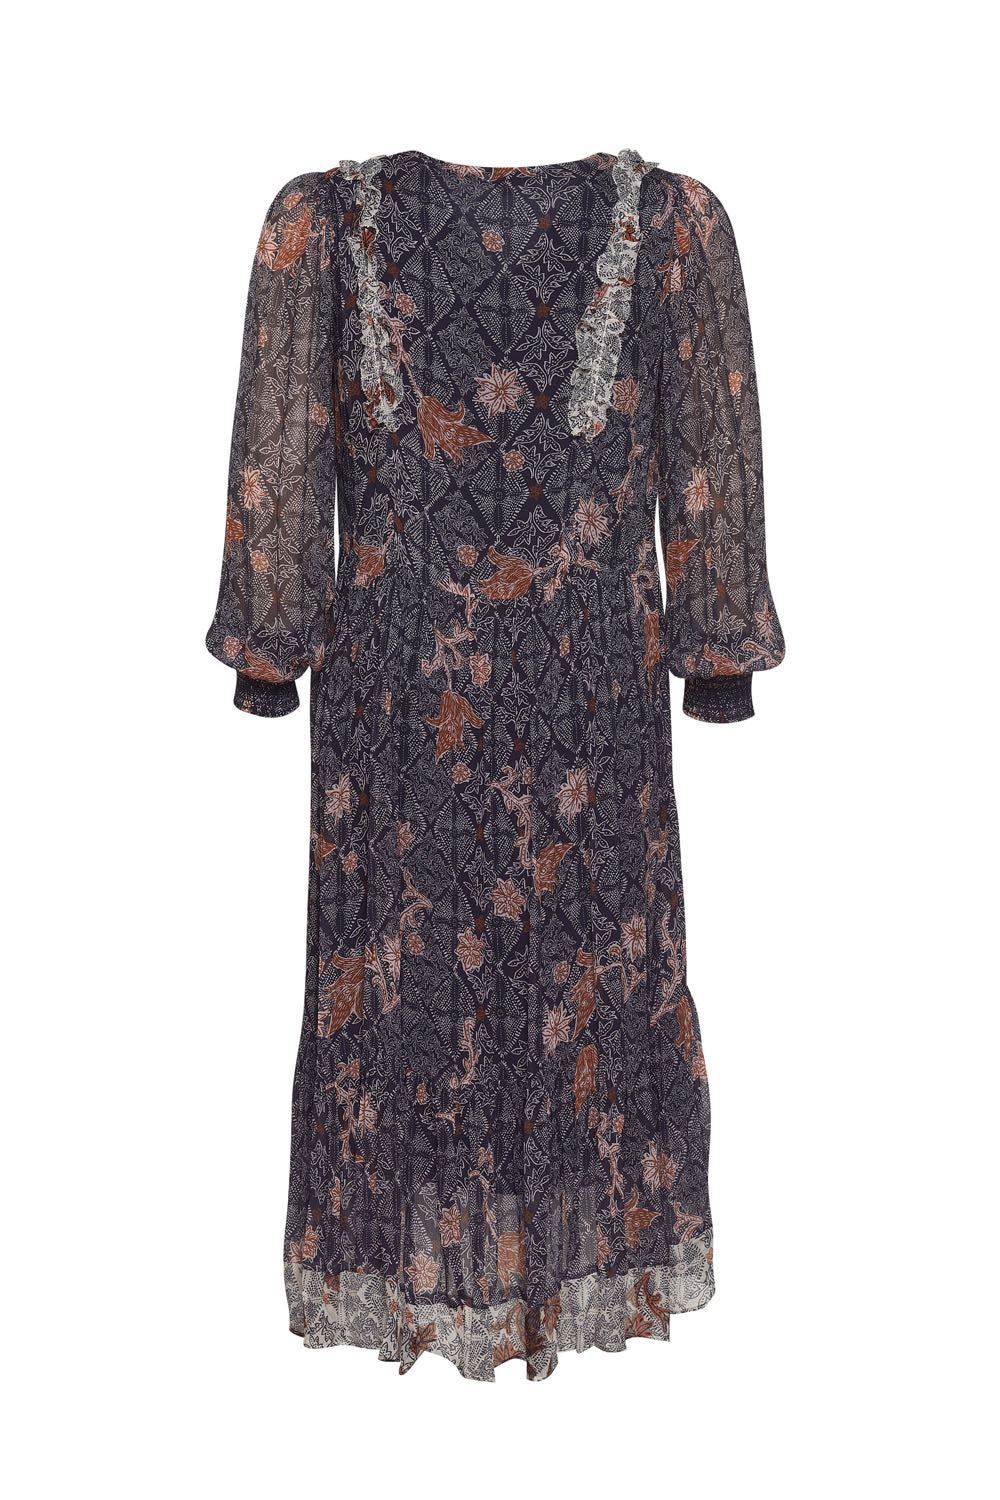 LOOBIE'S STORY FEARLESS DRESS - THE VOGUE STORE